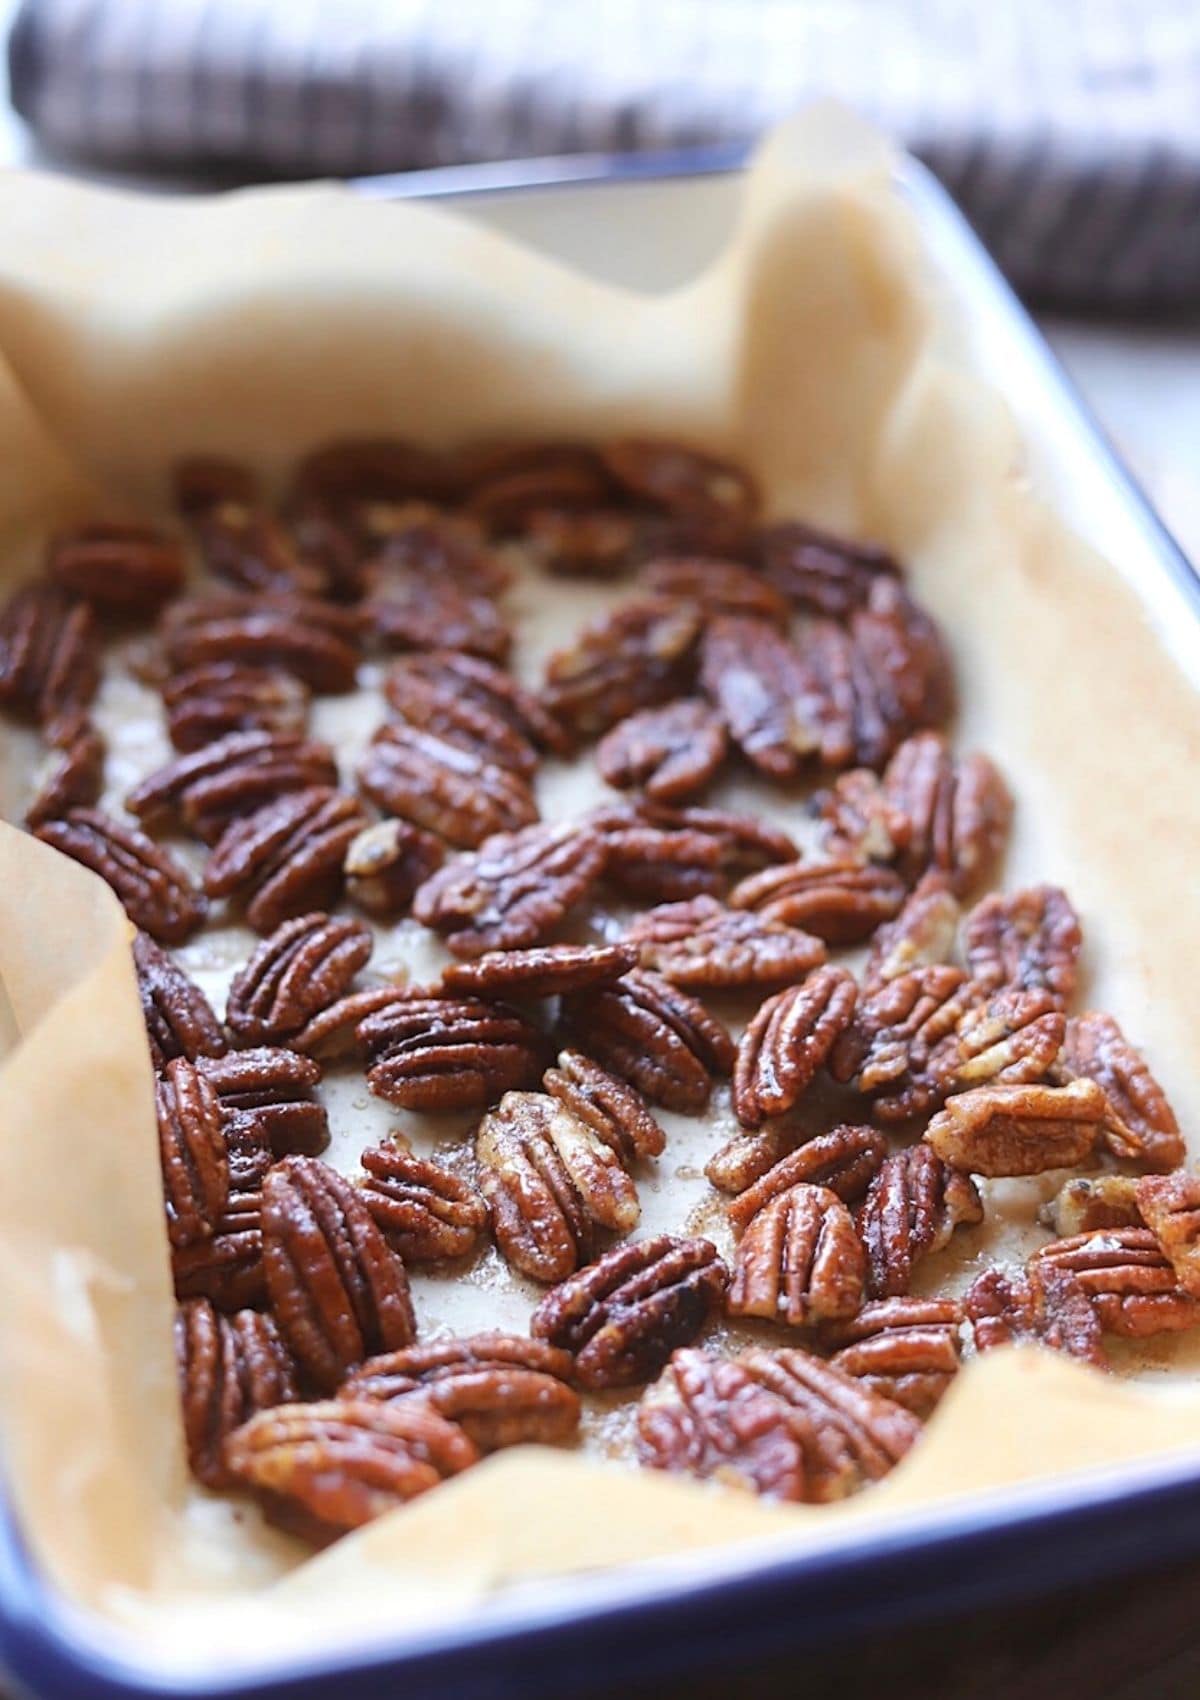 Honey roasted pecans in roasting dish on parchment paper.